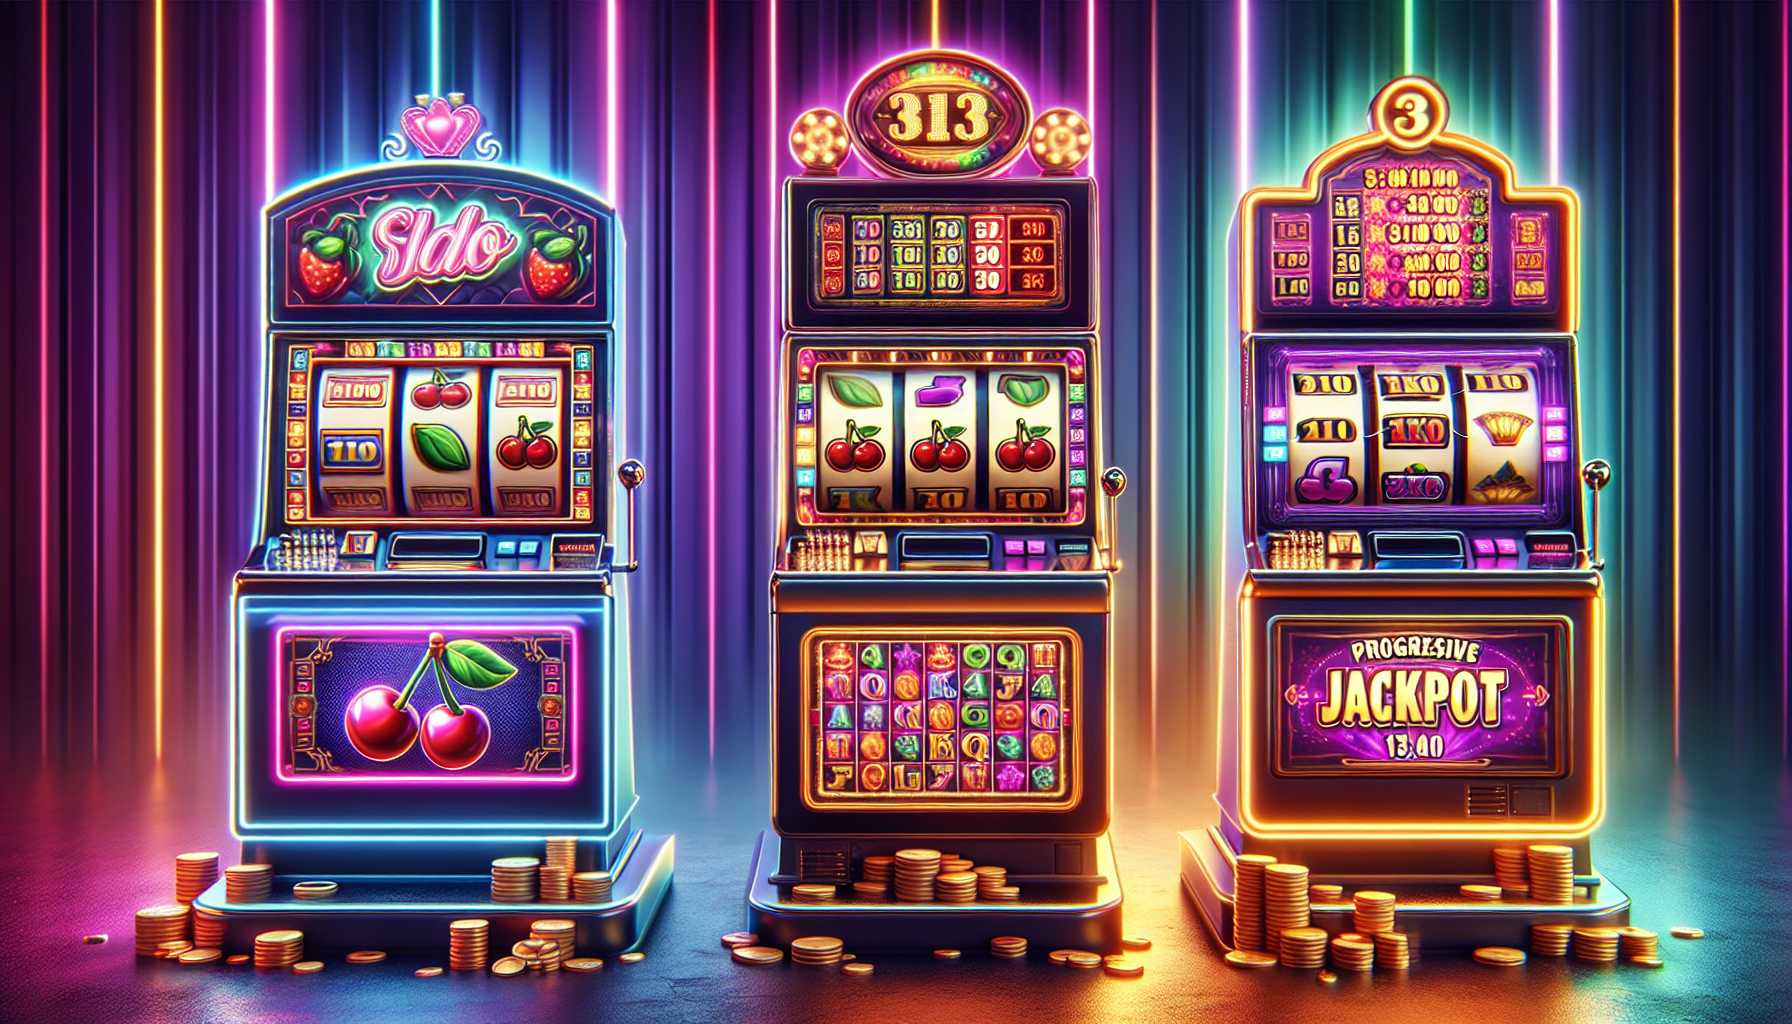 Illustration of various types of online slots including classic three-reel slots, video slots, and progressive jackpot slots